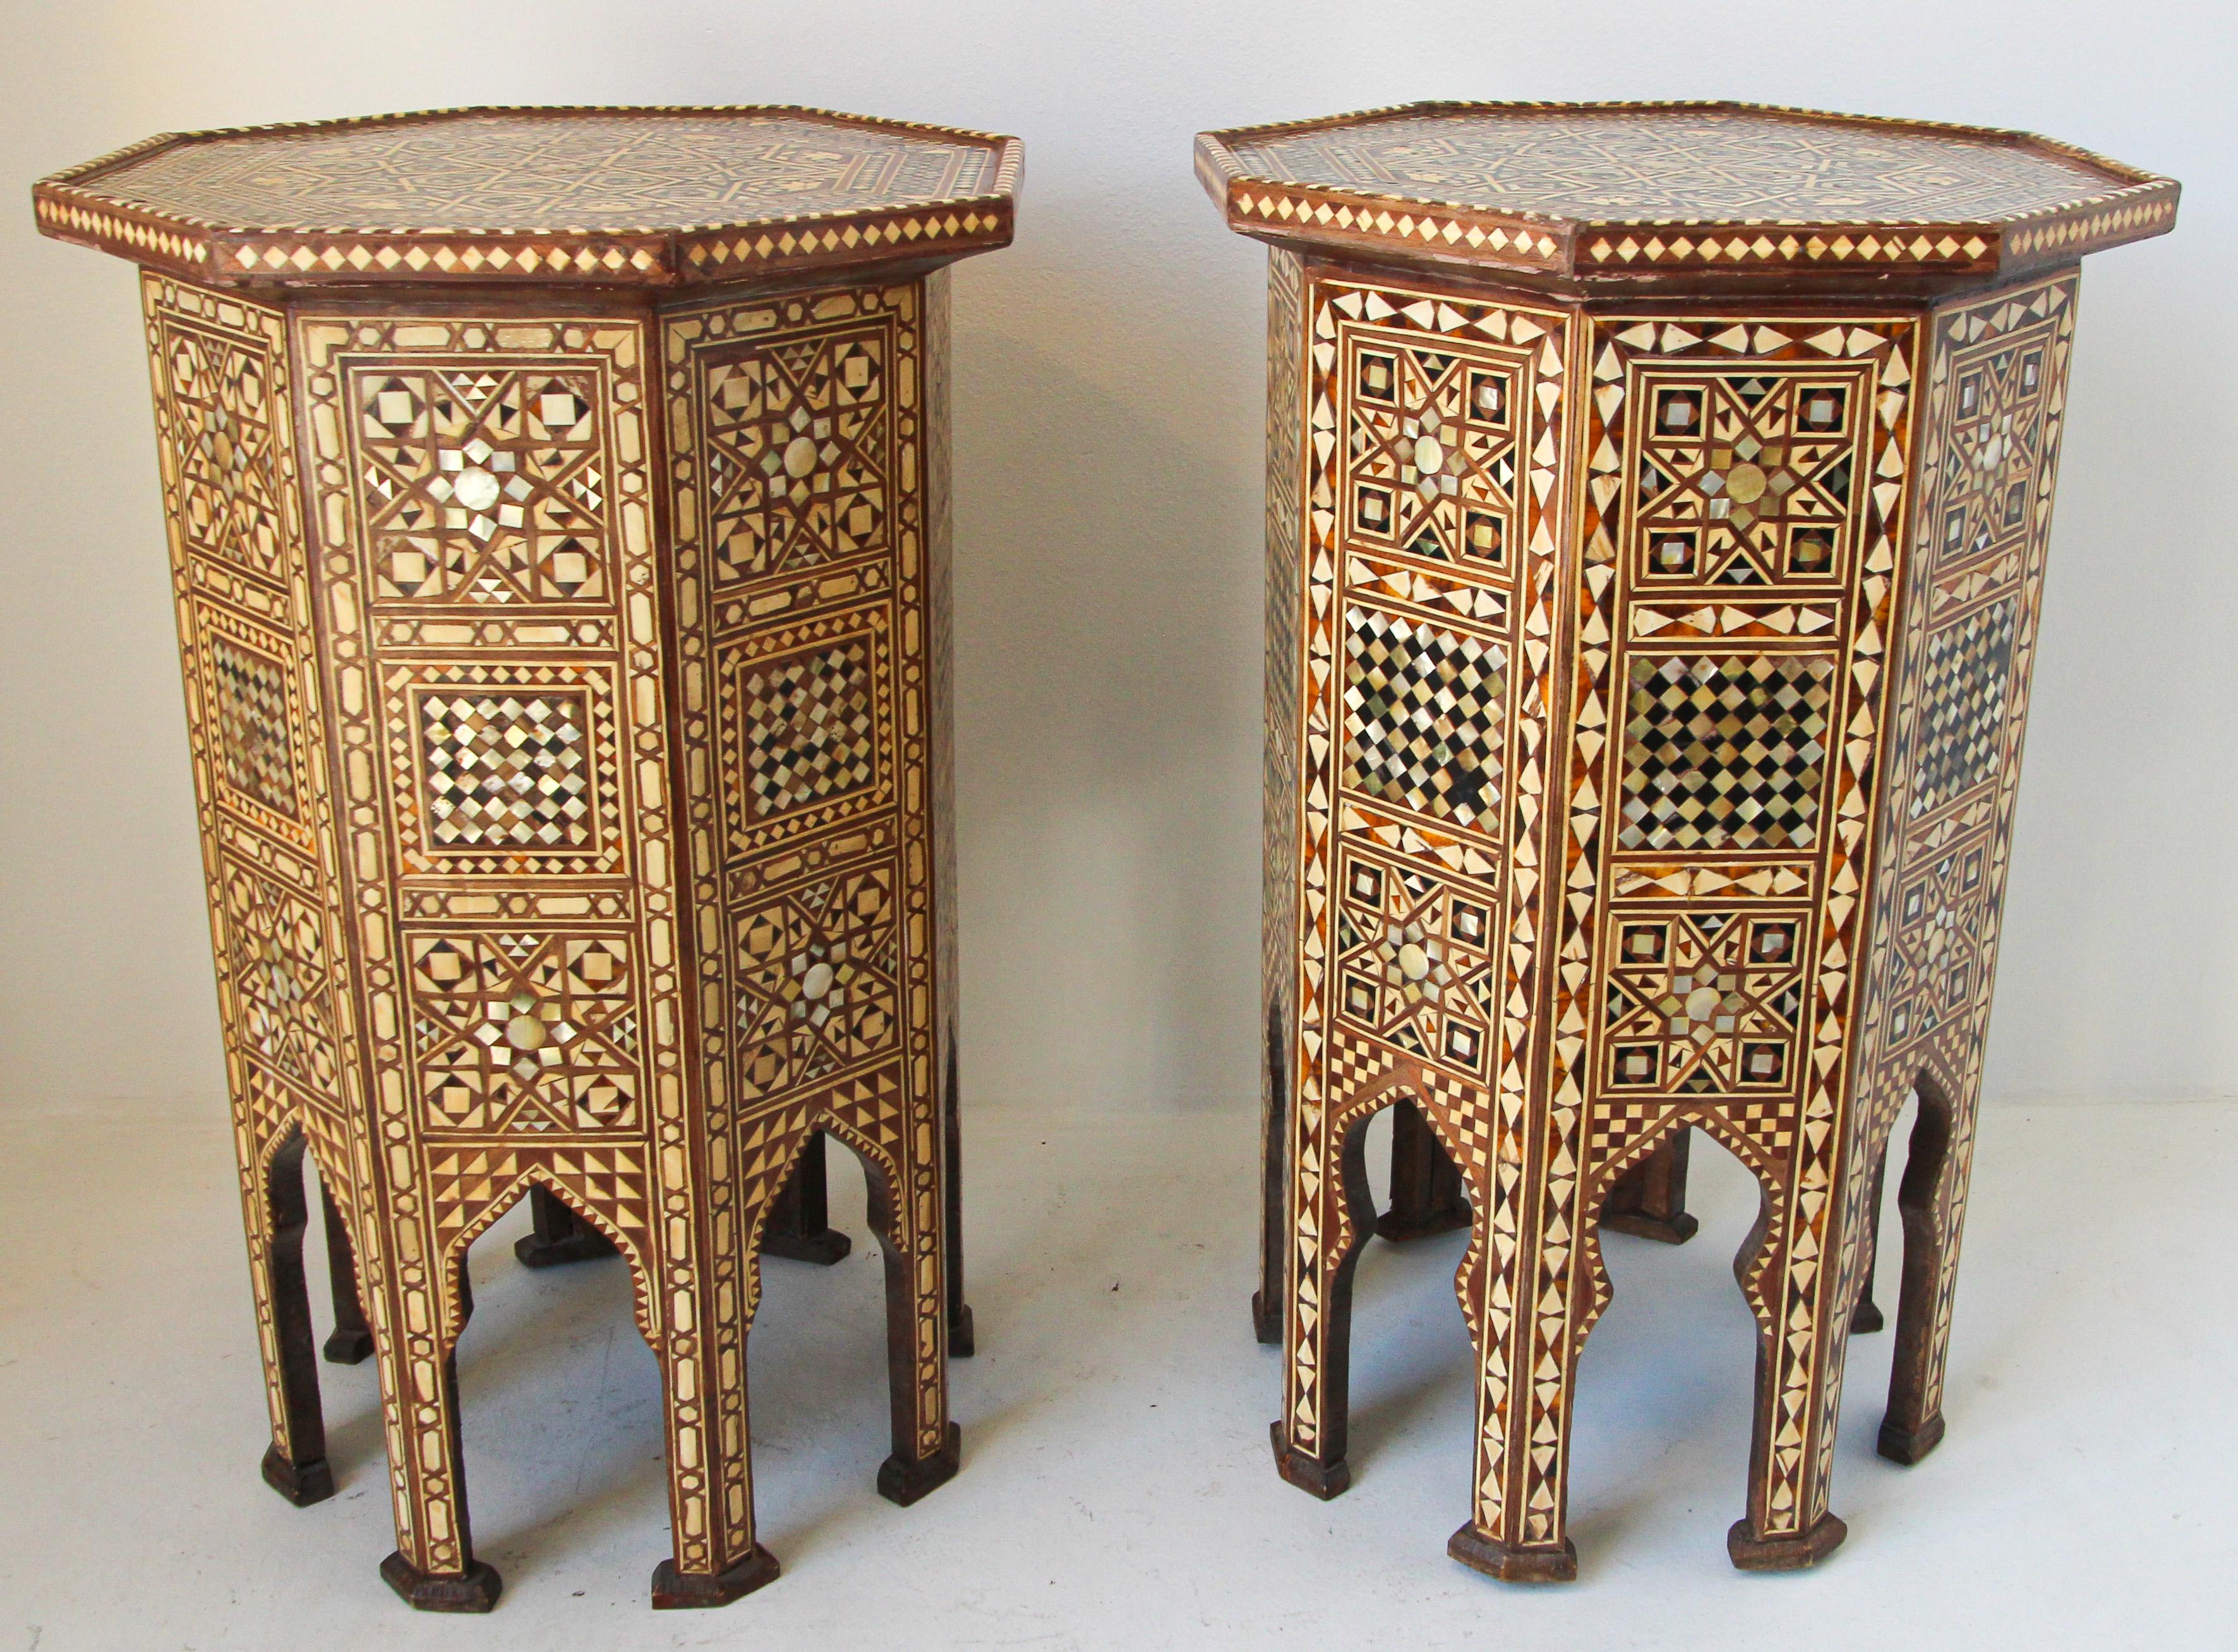 Moorish Moroccan Octagonal Pedestal Tables Inlaid with Mosaic Marquetry For Sale 5